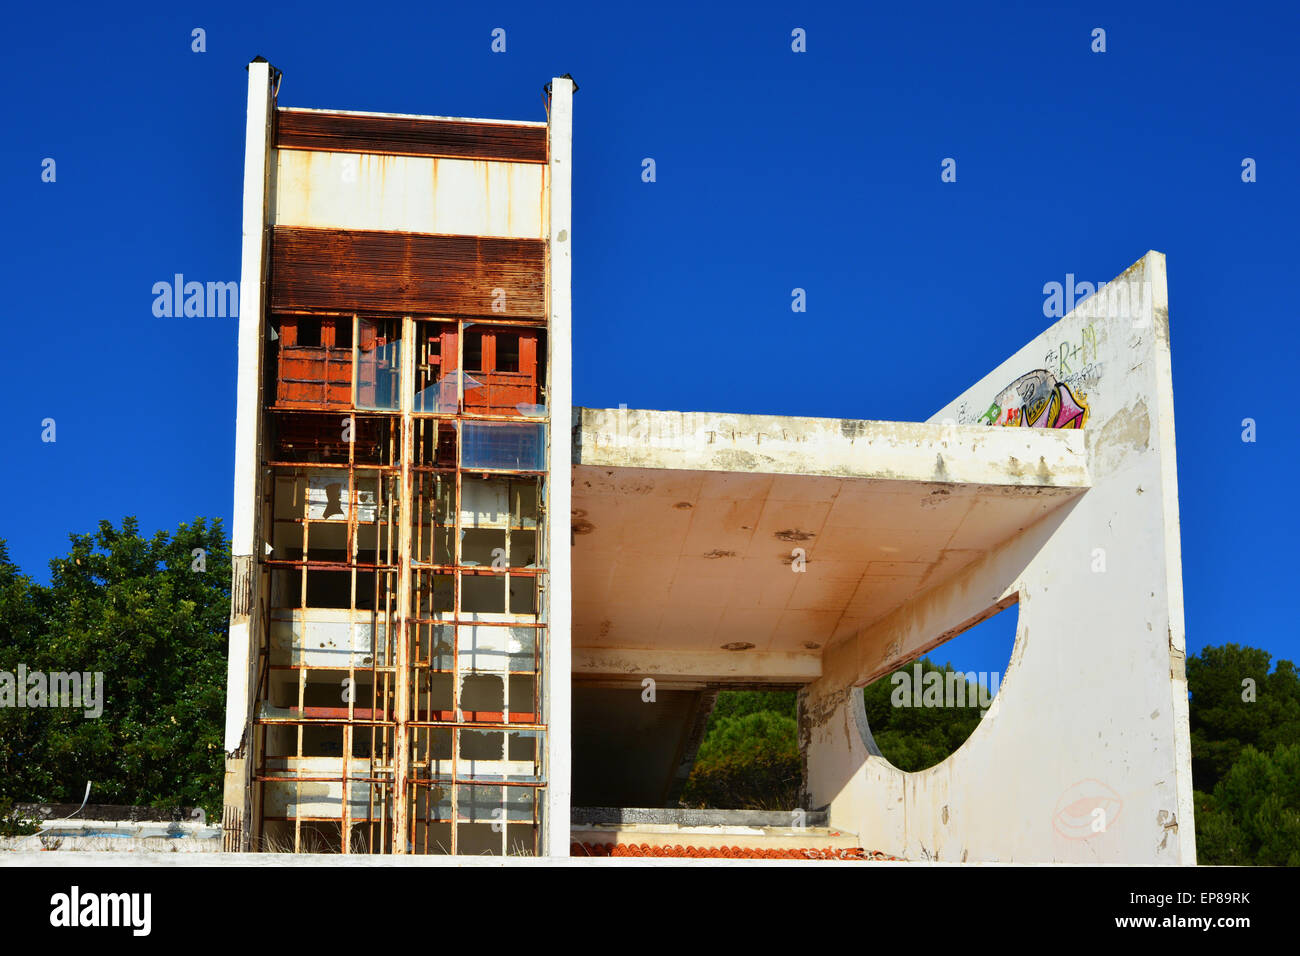 Abandoned and damaged modern buildings against blue sky Stock Photo